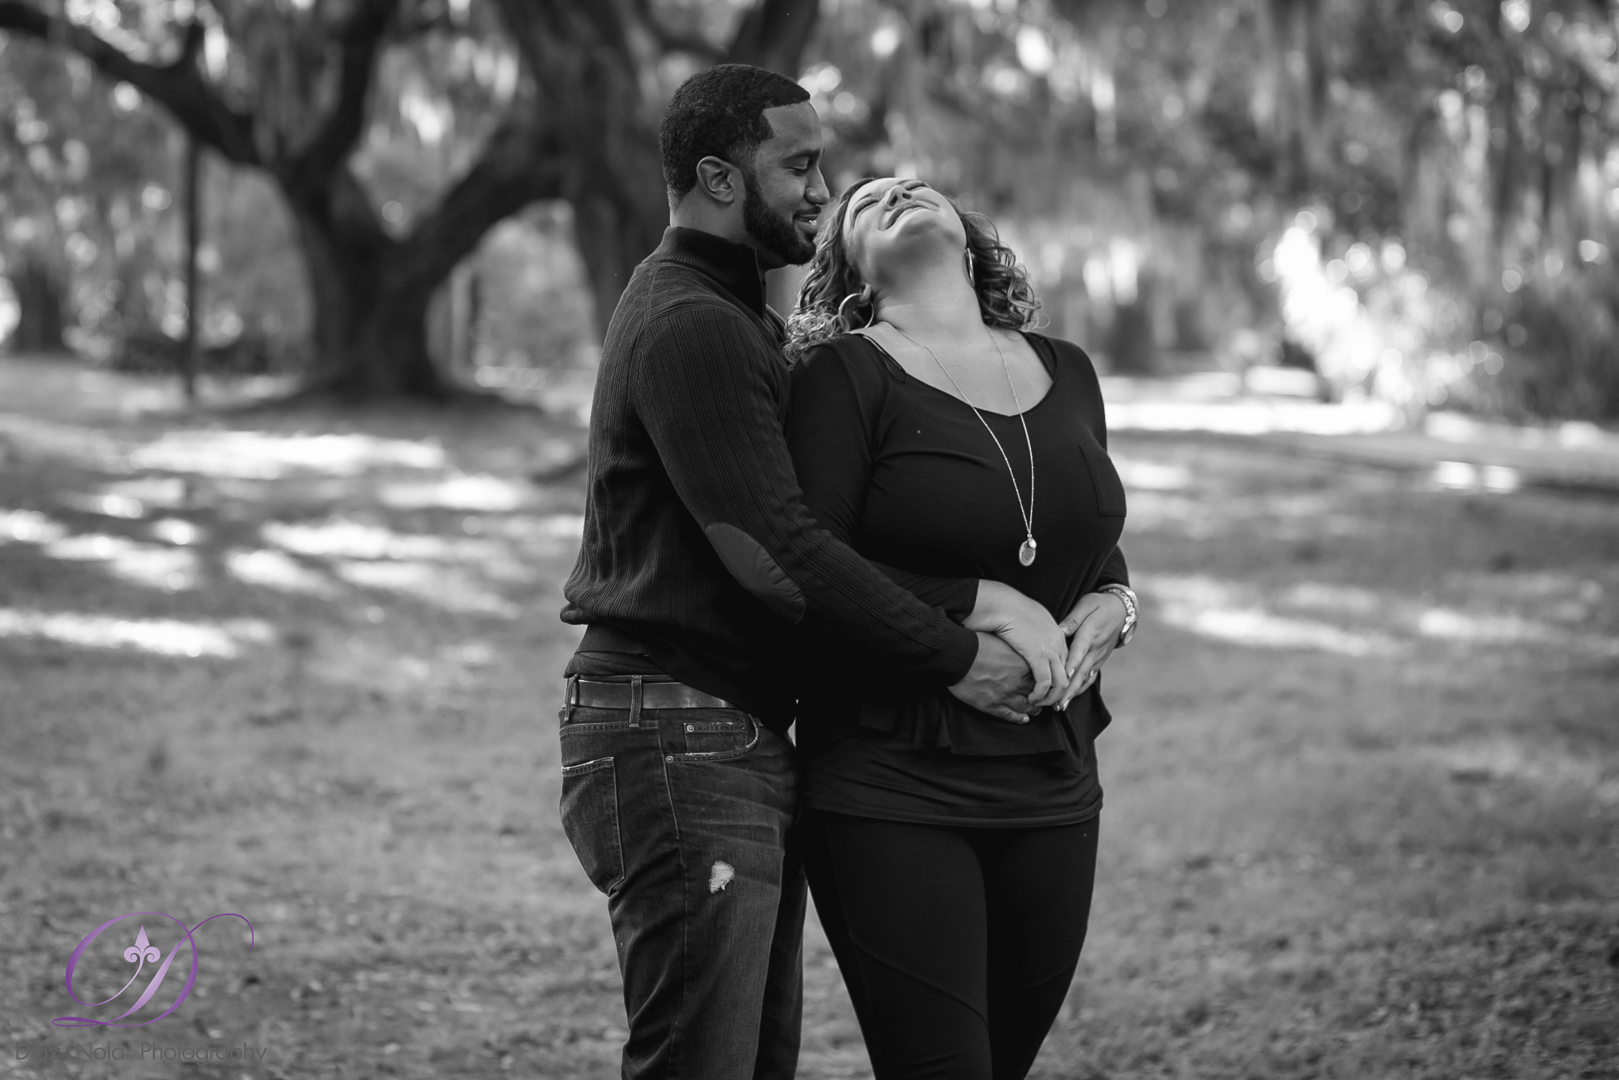 Emilyn & Justin Engagement Portrait Photography (13 of 22)